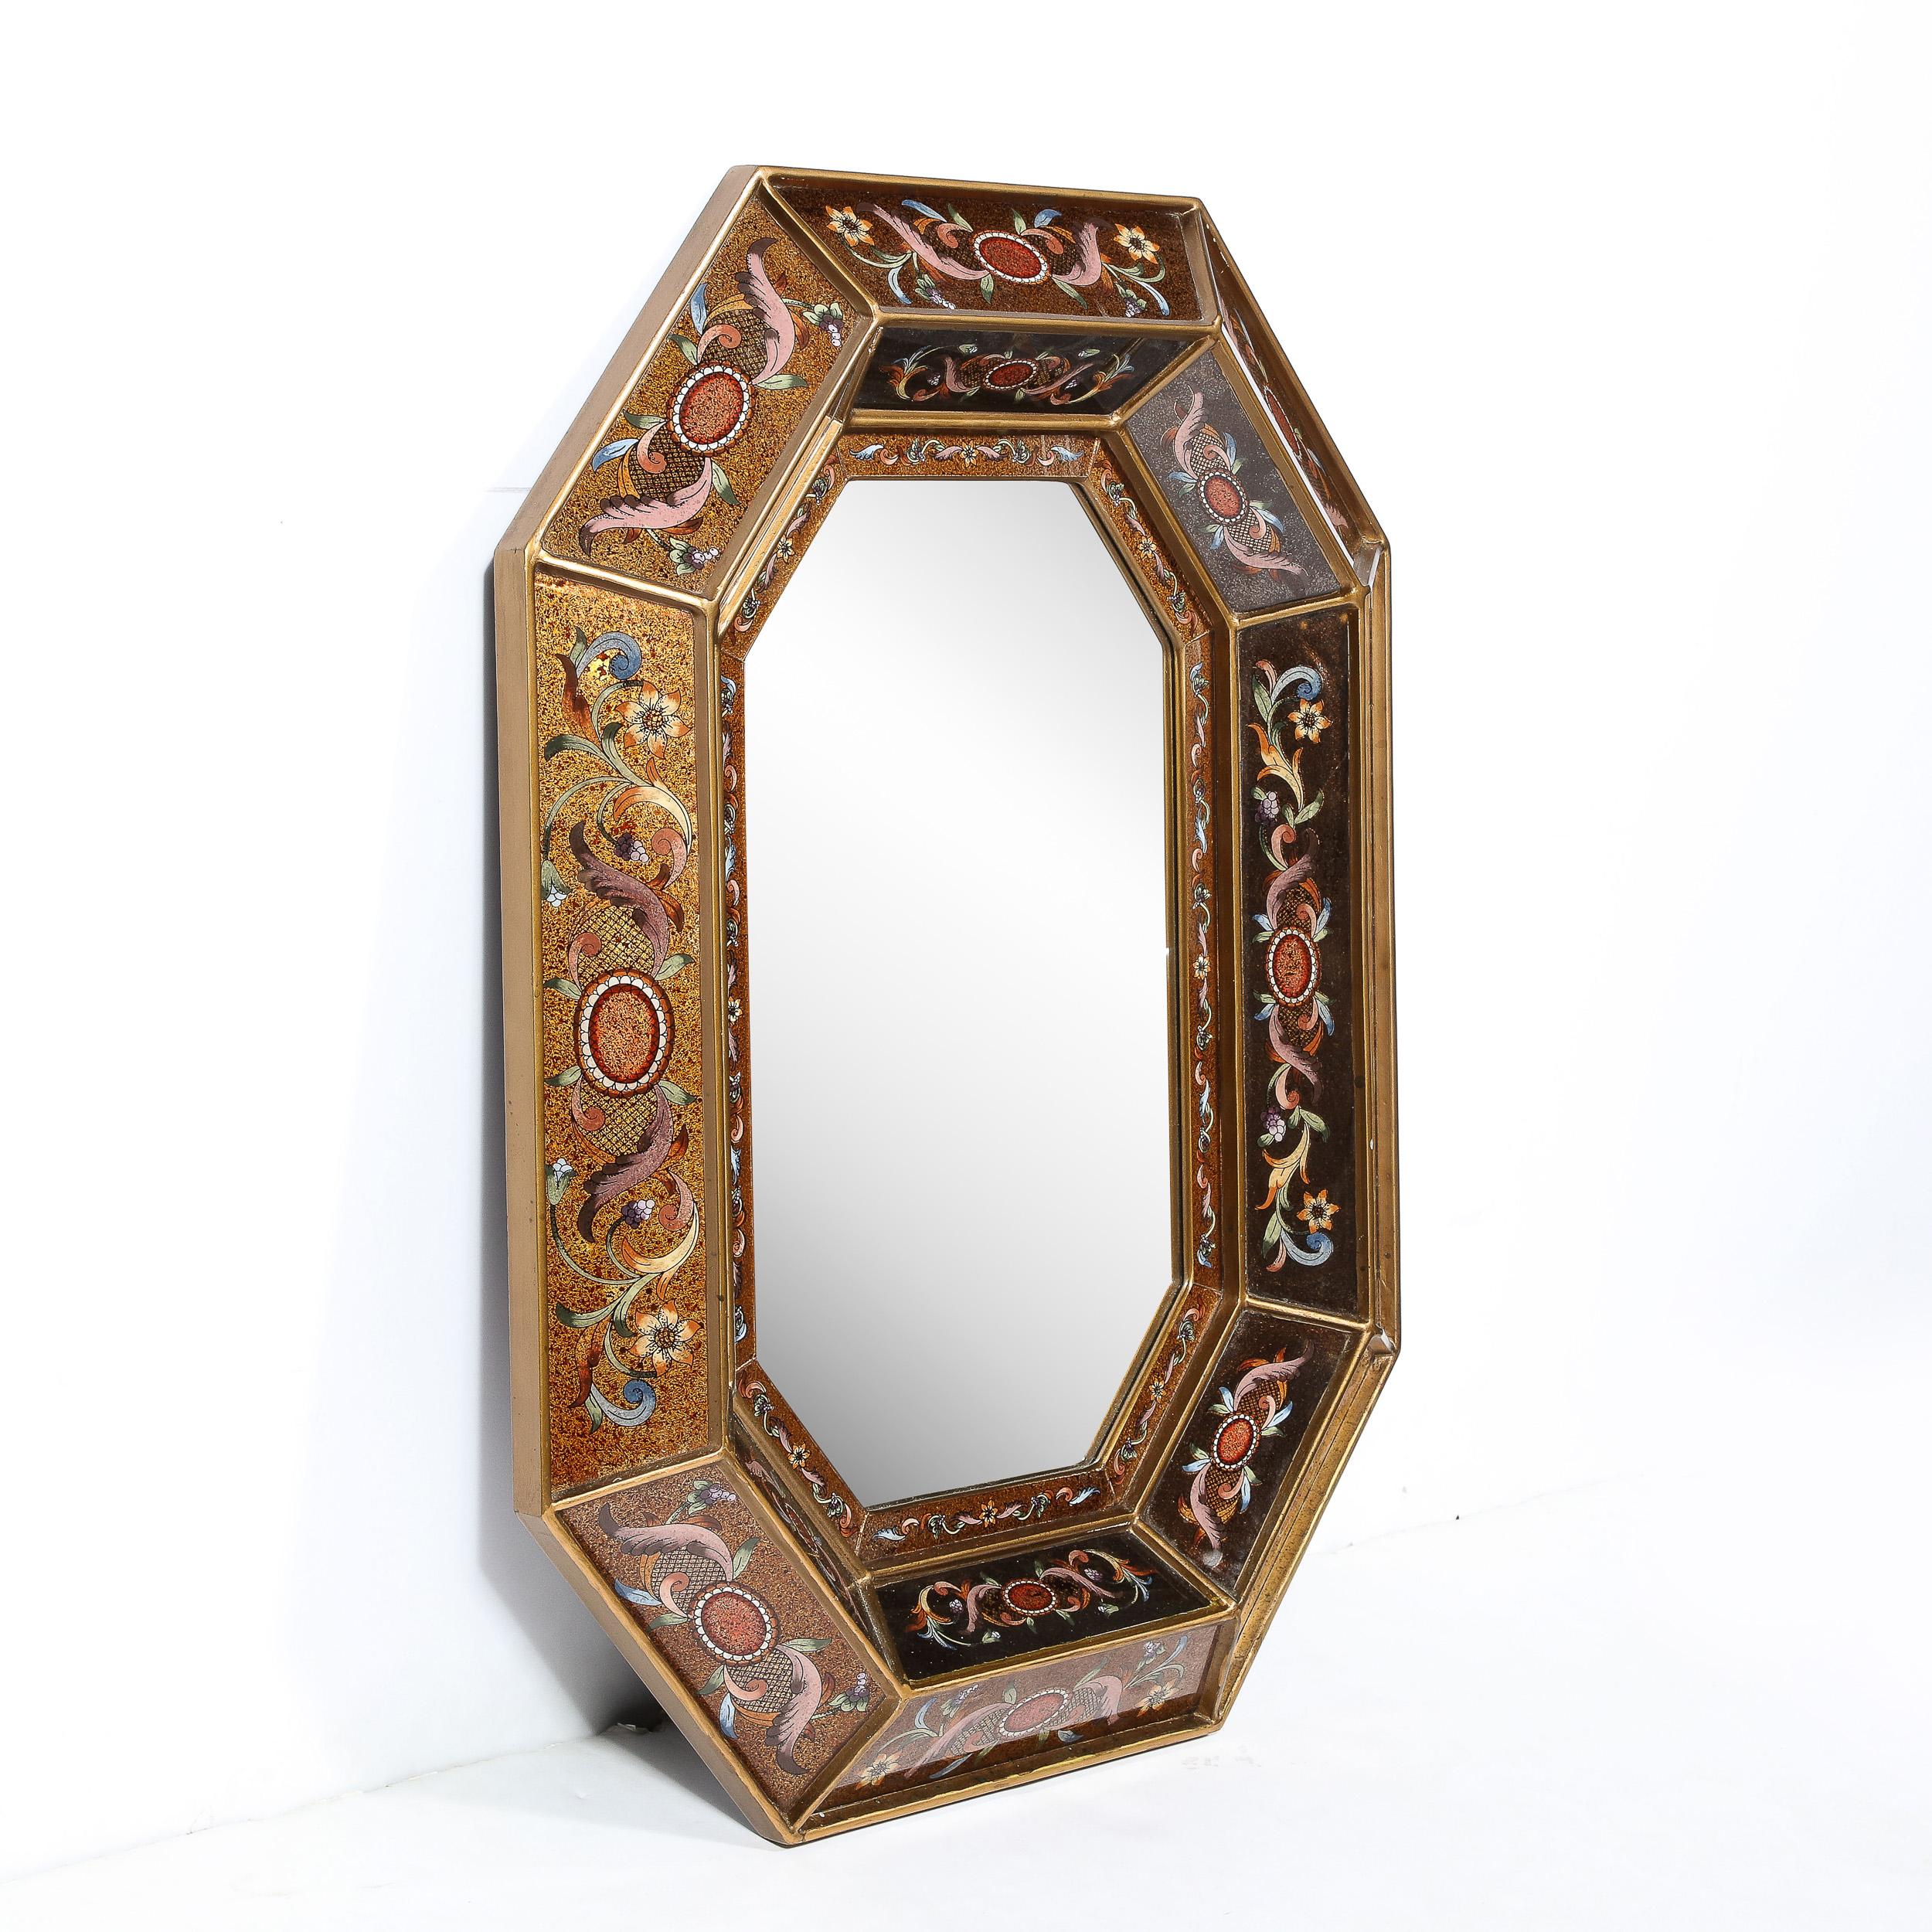 This stunning mid century octagonal shadowbox mirror was realized in Italy, circa 1950.. It features three layers composed of a wealth of handpainted panels diminishing in thickness as they move towards the interior octagonal plain mirror panel. The